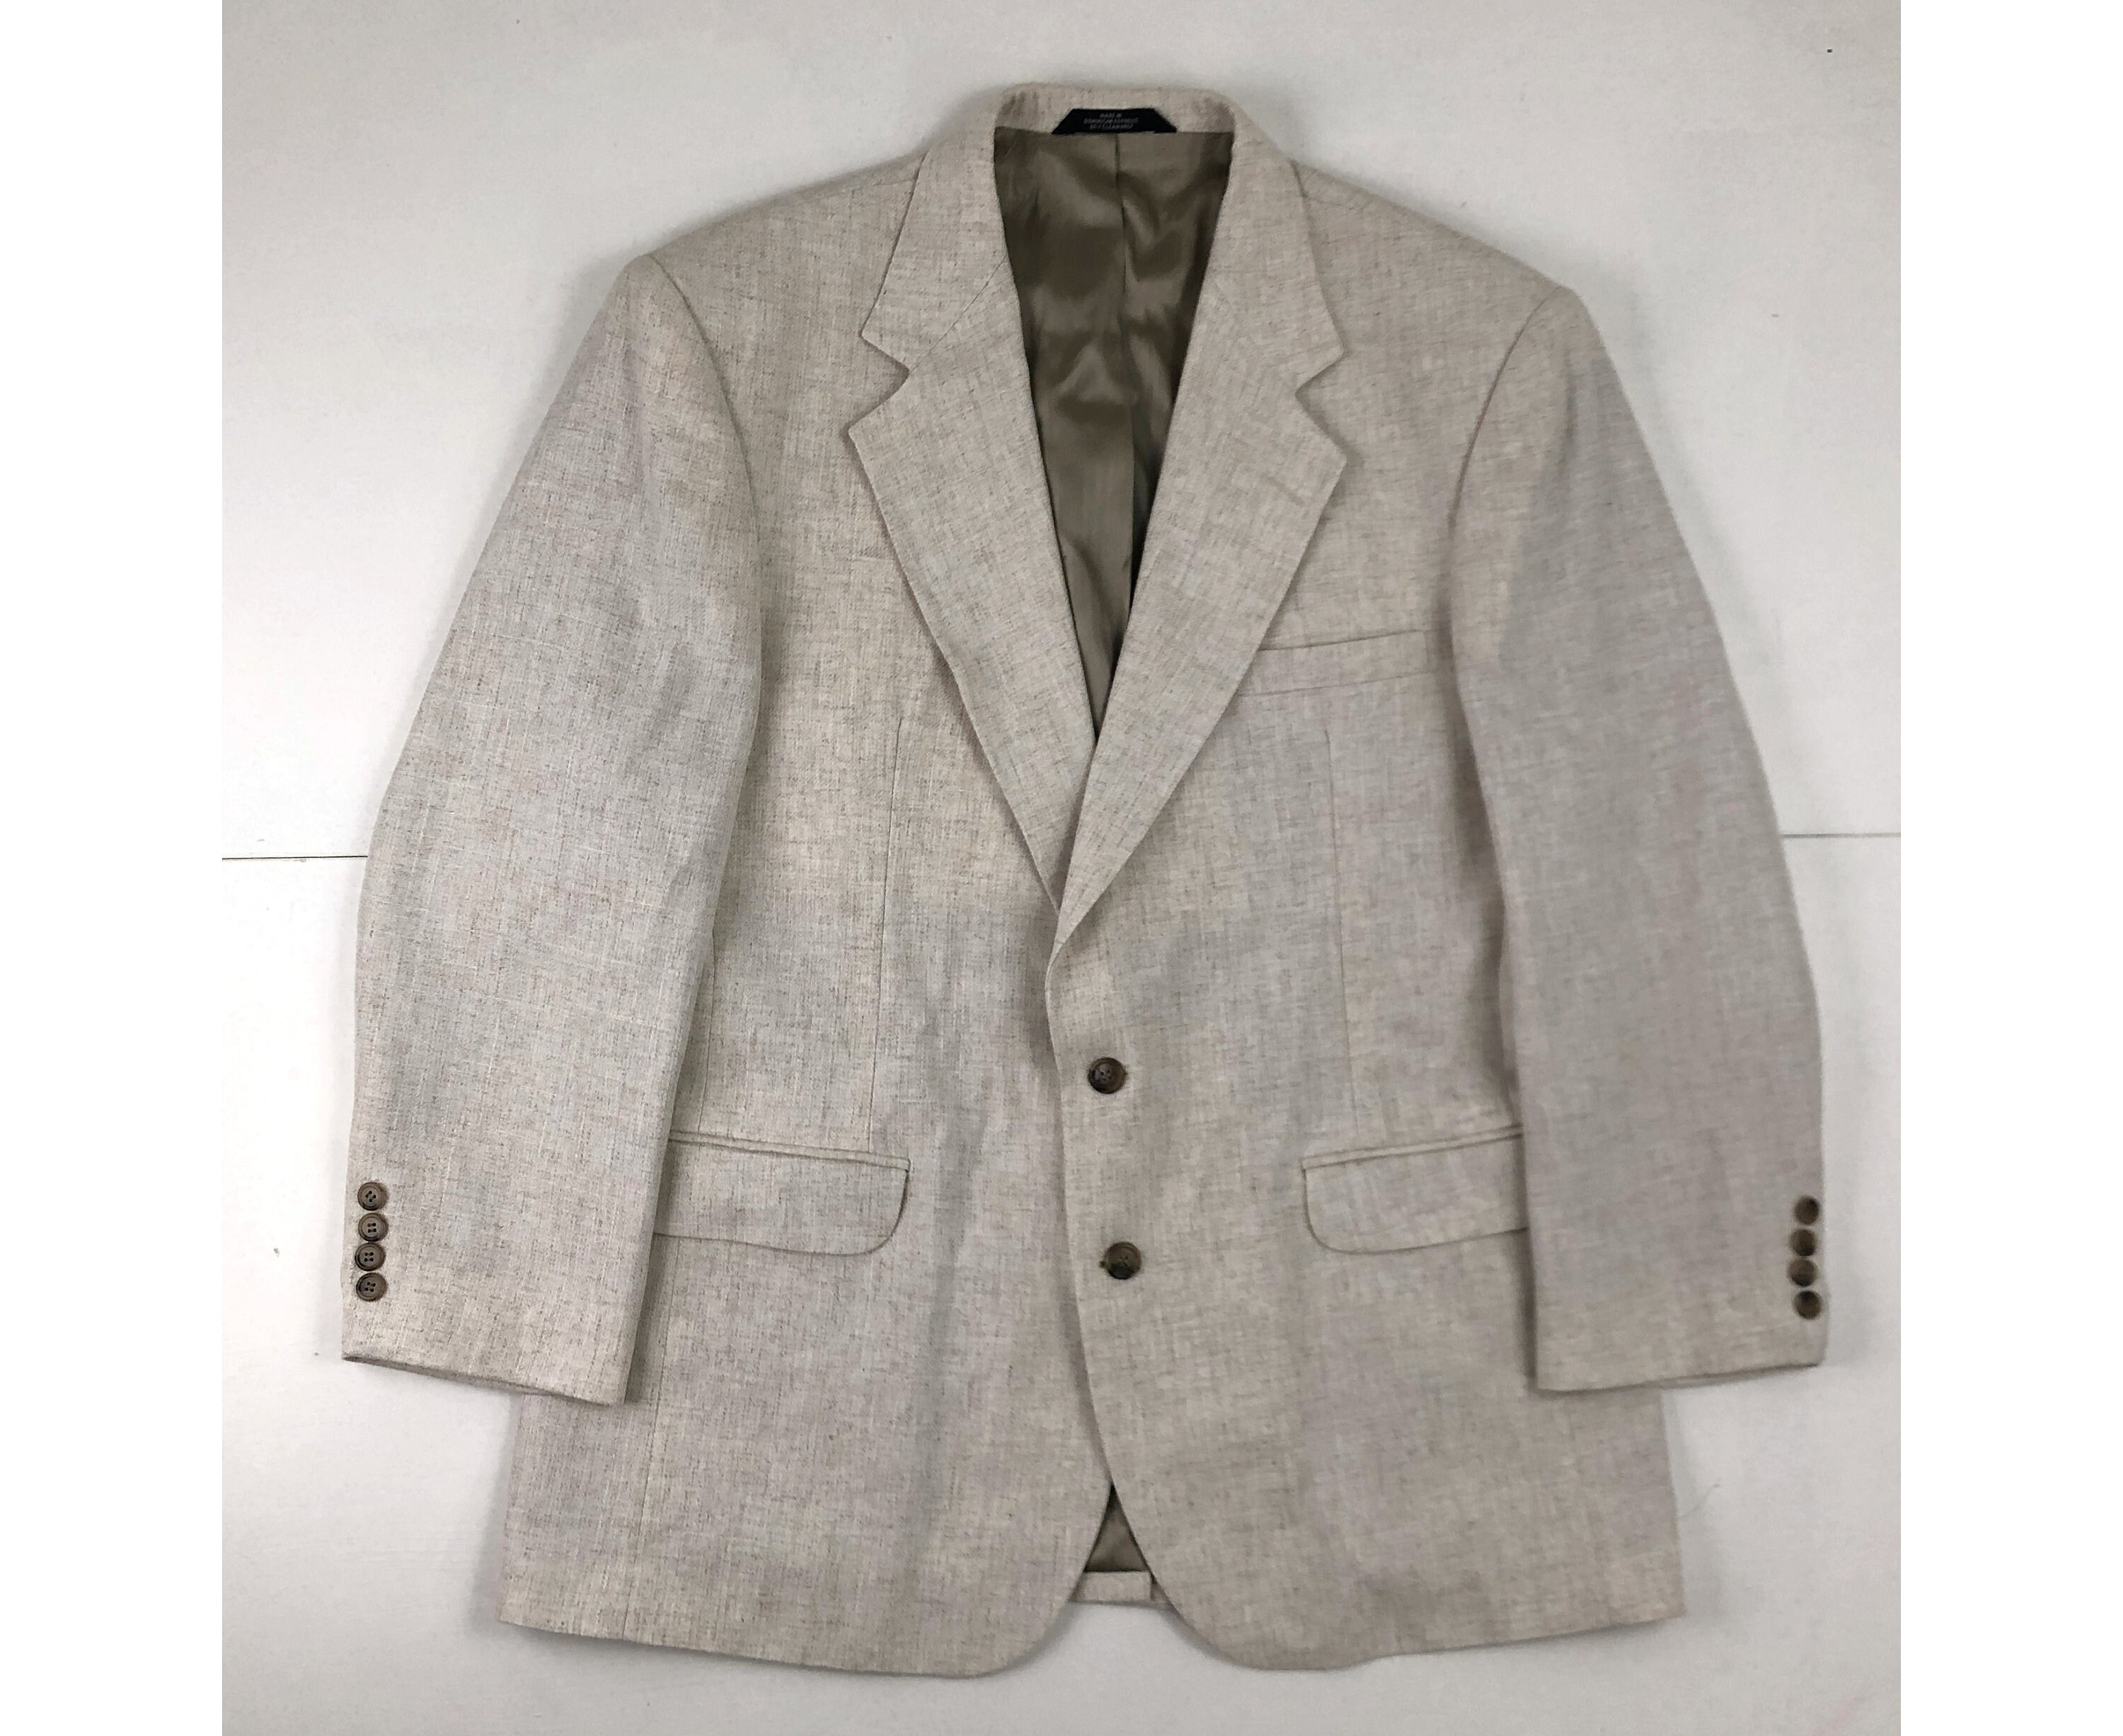 Men's Casual Linen Lightweight Blazer Suit Jacket Single Breasted Pre-Washed with Embriodered Detail 